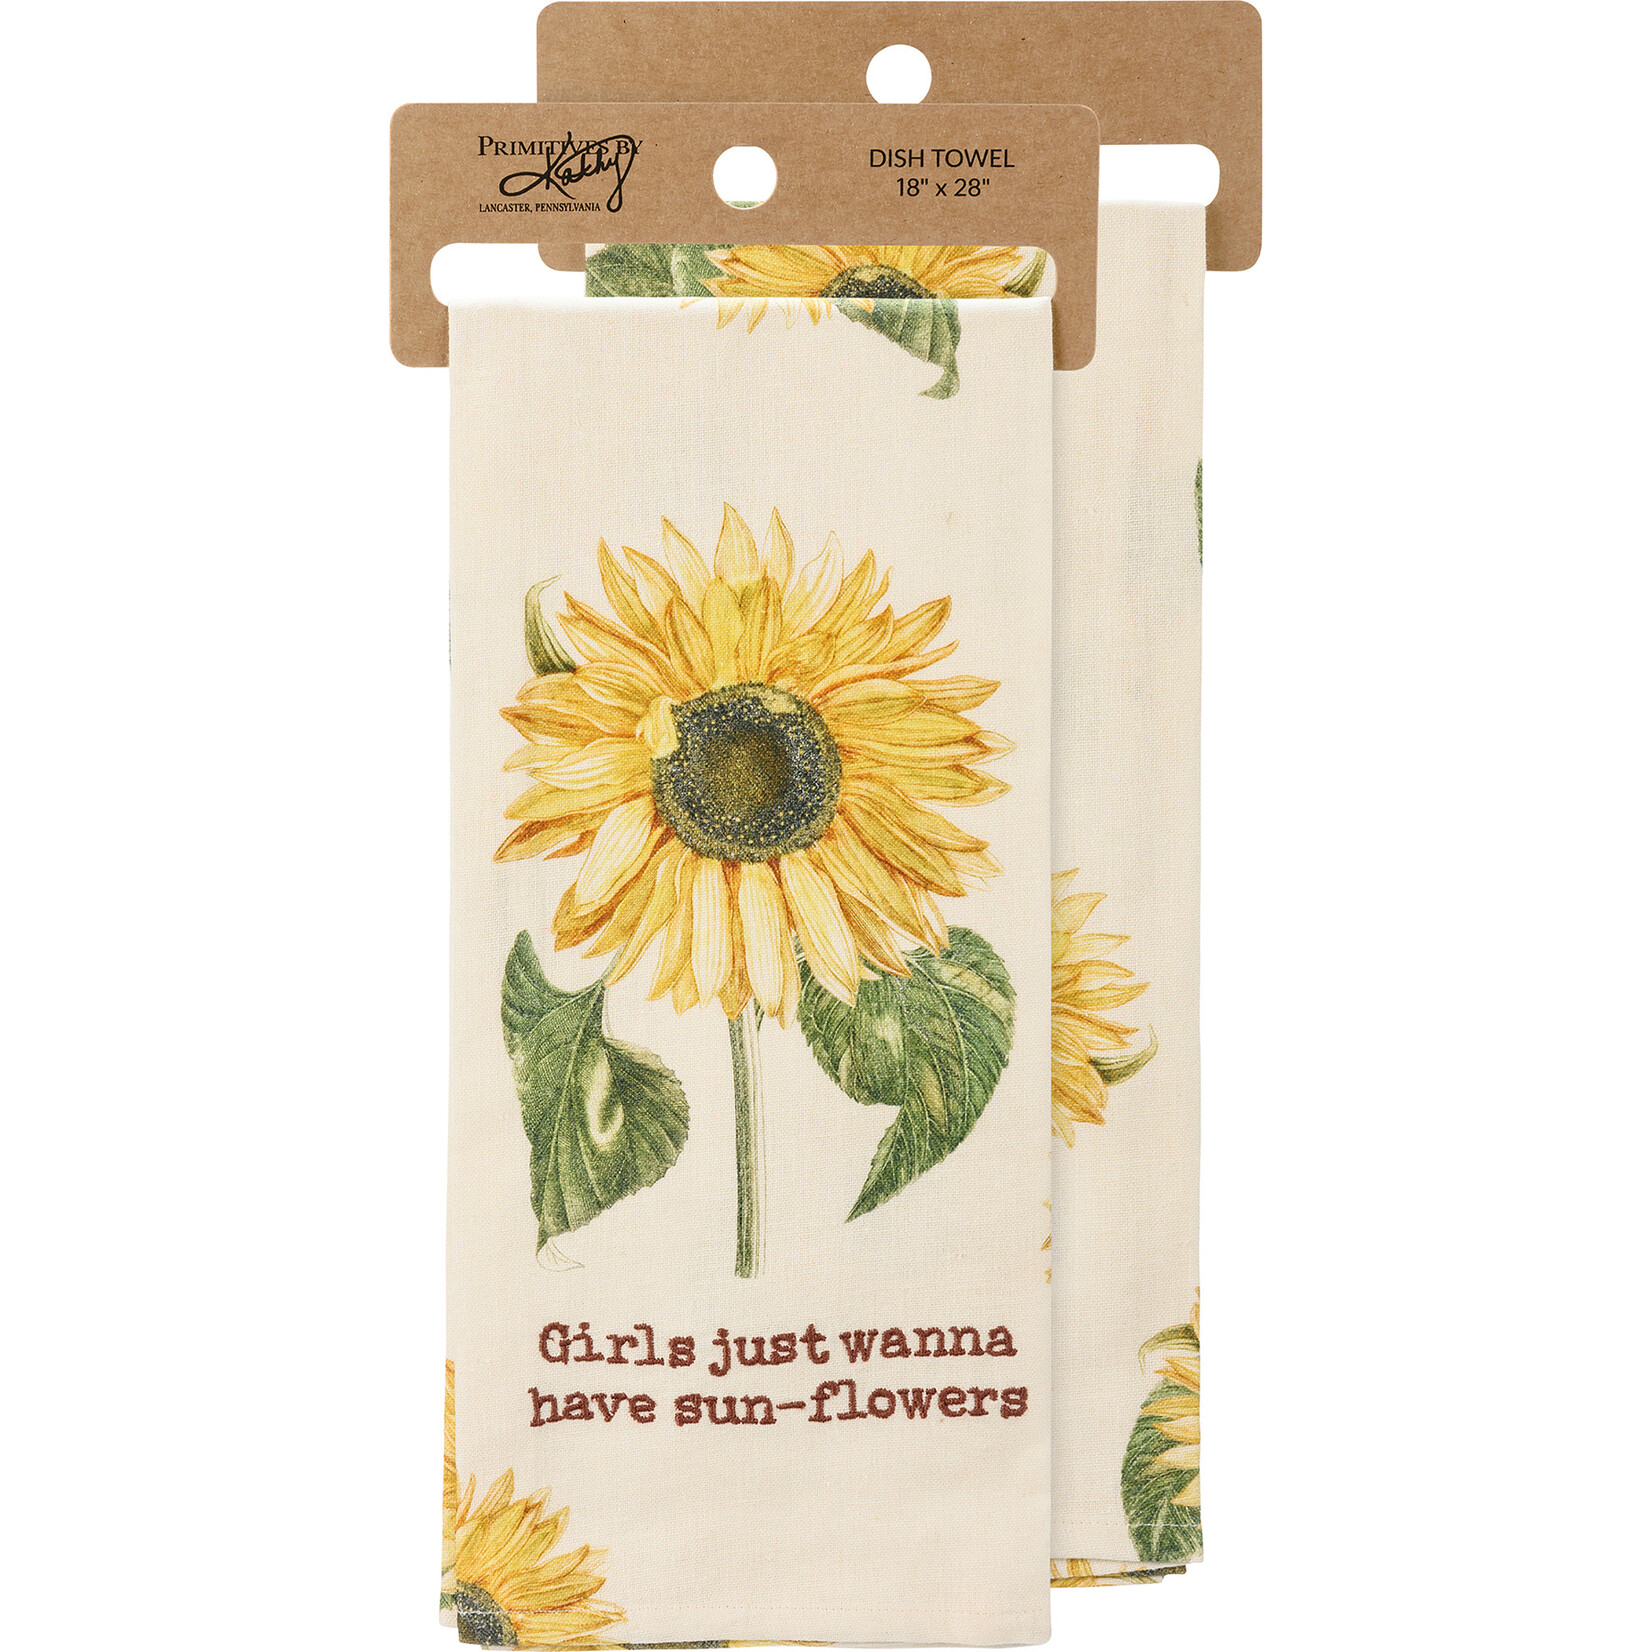 Primitives by Kathy Primitives by Kathy Girls Just Wanna Have Sun-Flowers Kitchen Towel